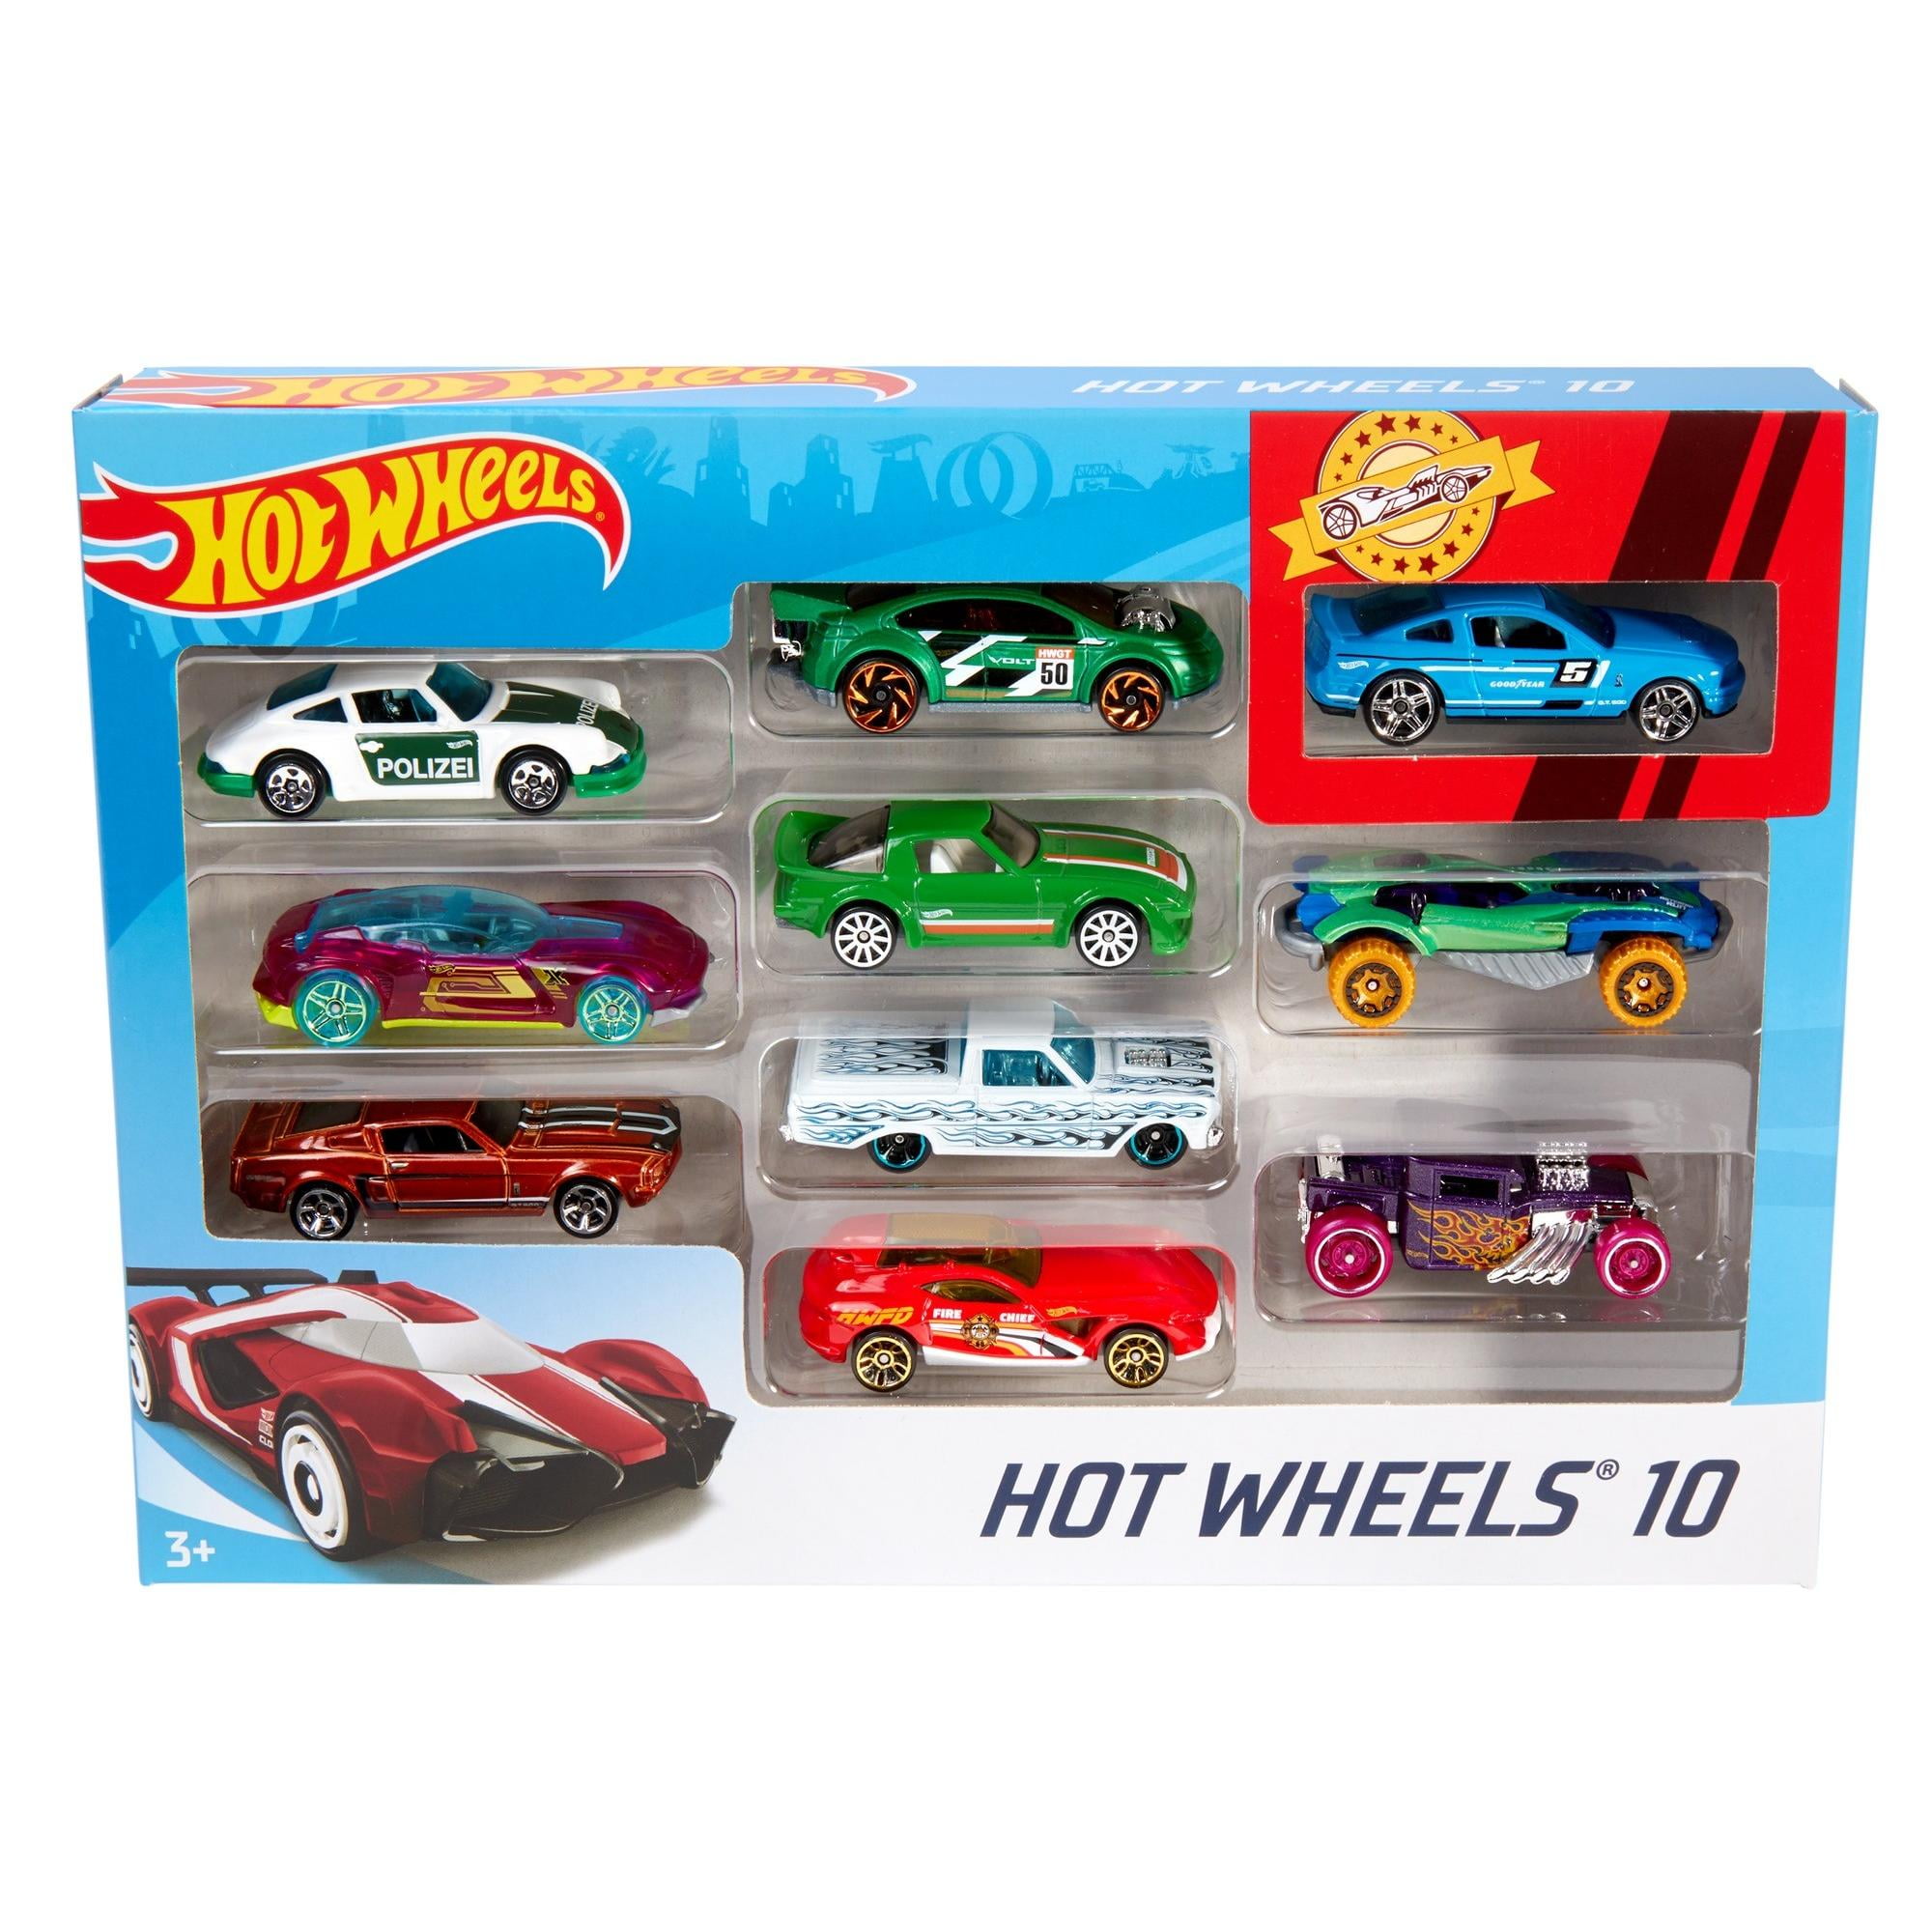 Hot Wheels 5 Cars Diecast Vehicle Pack Limited Editions Mattel New Genuine 3+ 